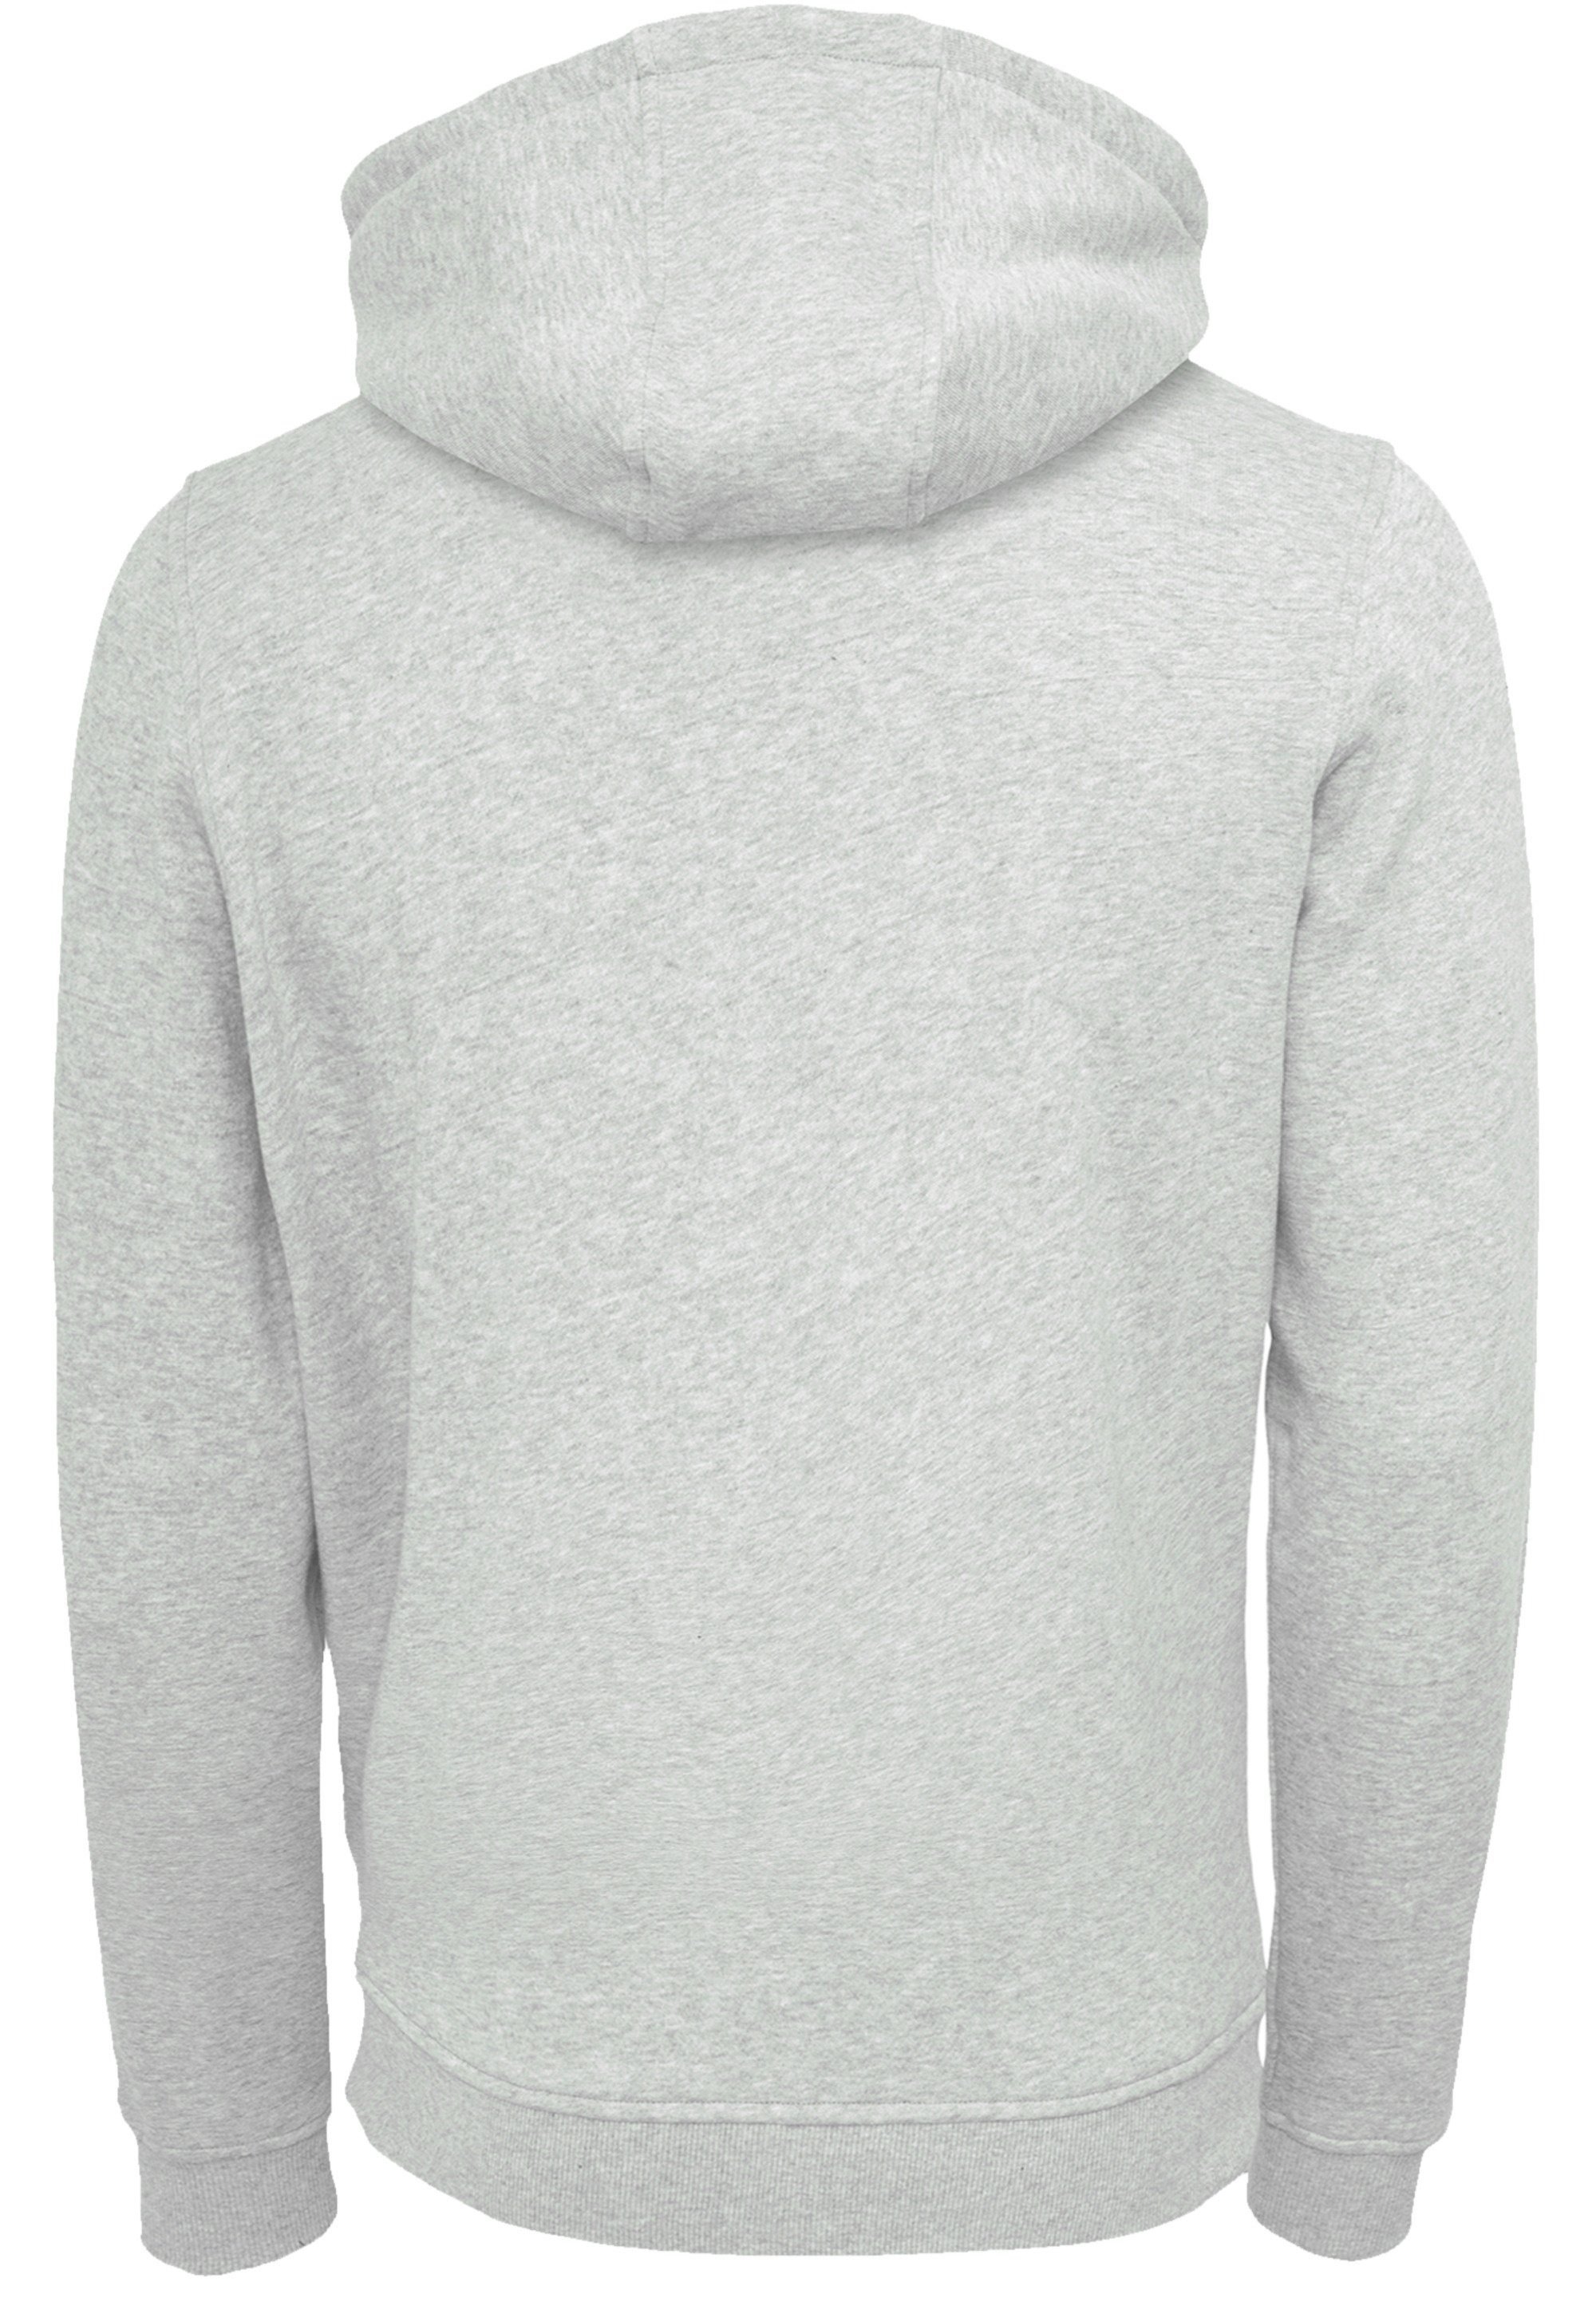 F4NT4STIC world Warm, Bequem Kapuzenpullover heather the Hoodie, grey Discover